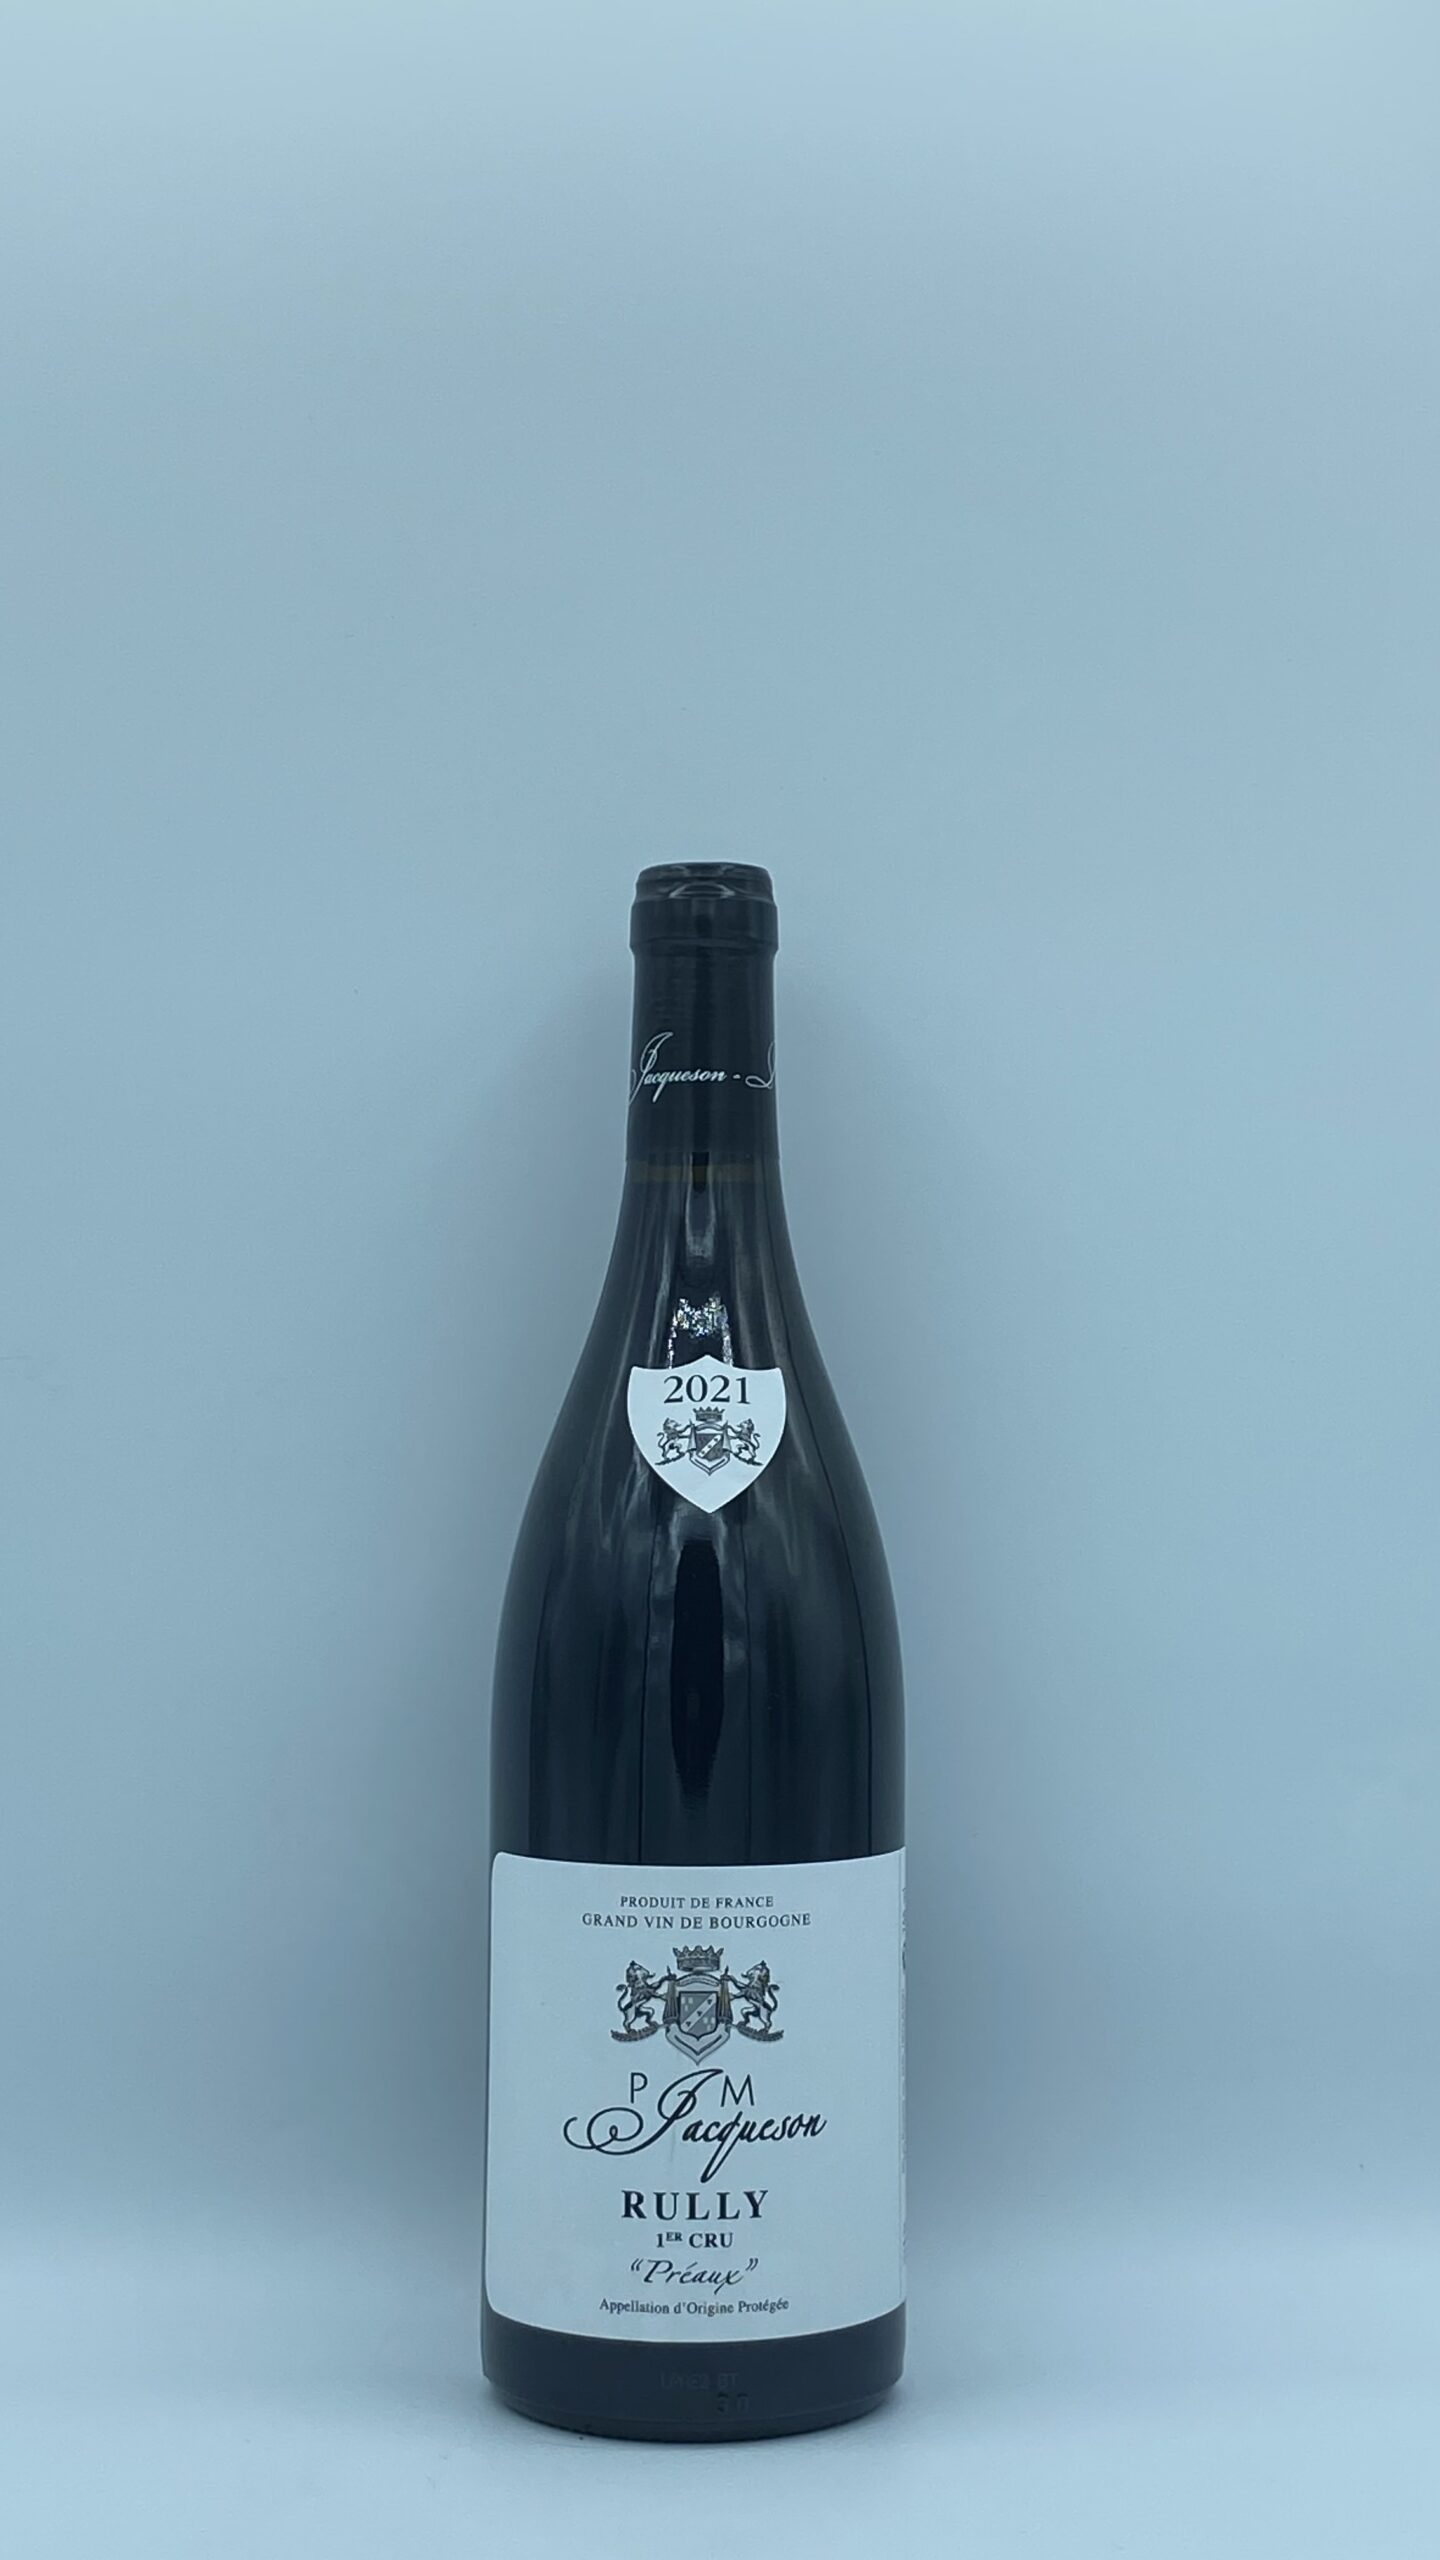 Bourgogne Rully 1er cru “Preaux” 2021 Domaine Jacqueson